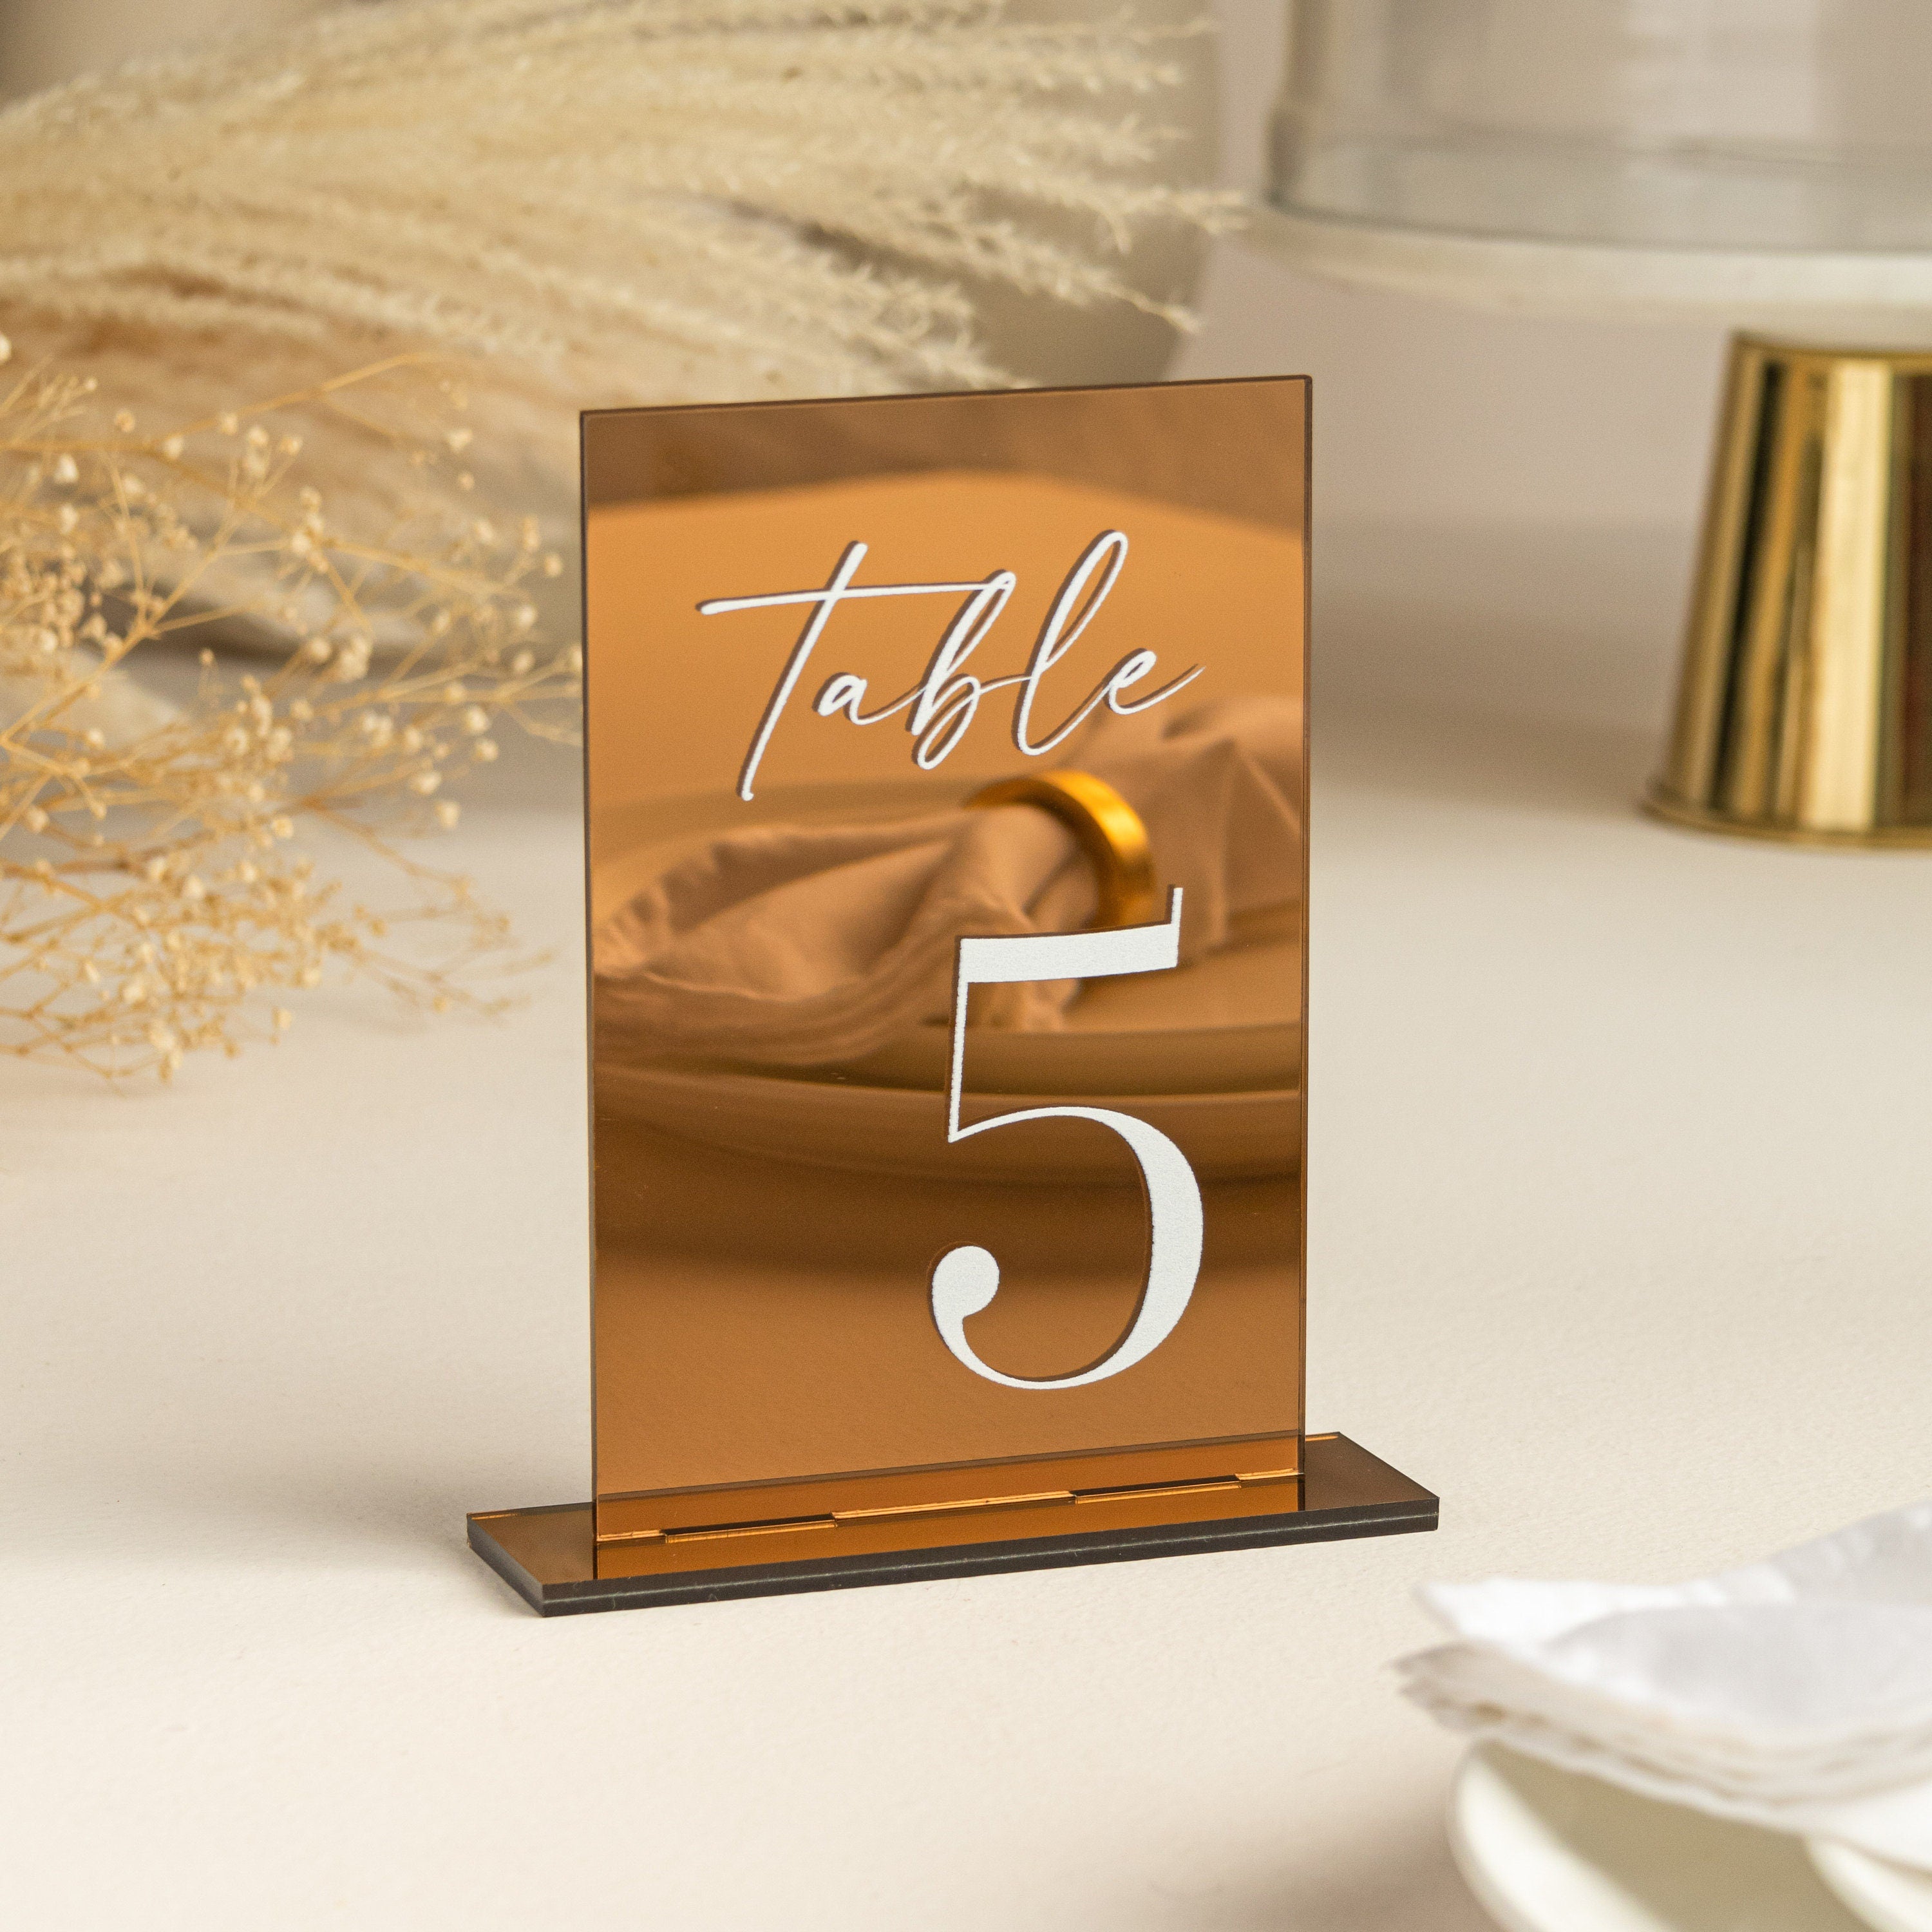 Mirror Gold Acrylic Table Numbers | Wedding Table Numbers | Acrylic Table Numbers | Table Numbers Wedding Decoration | Wedding Table Decor